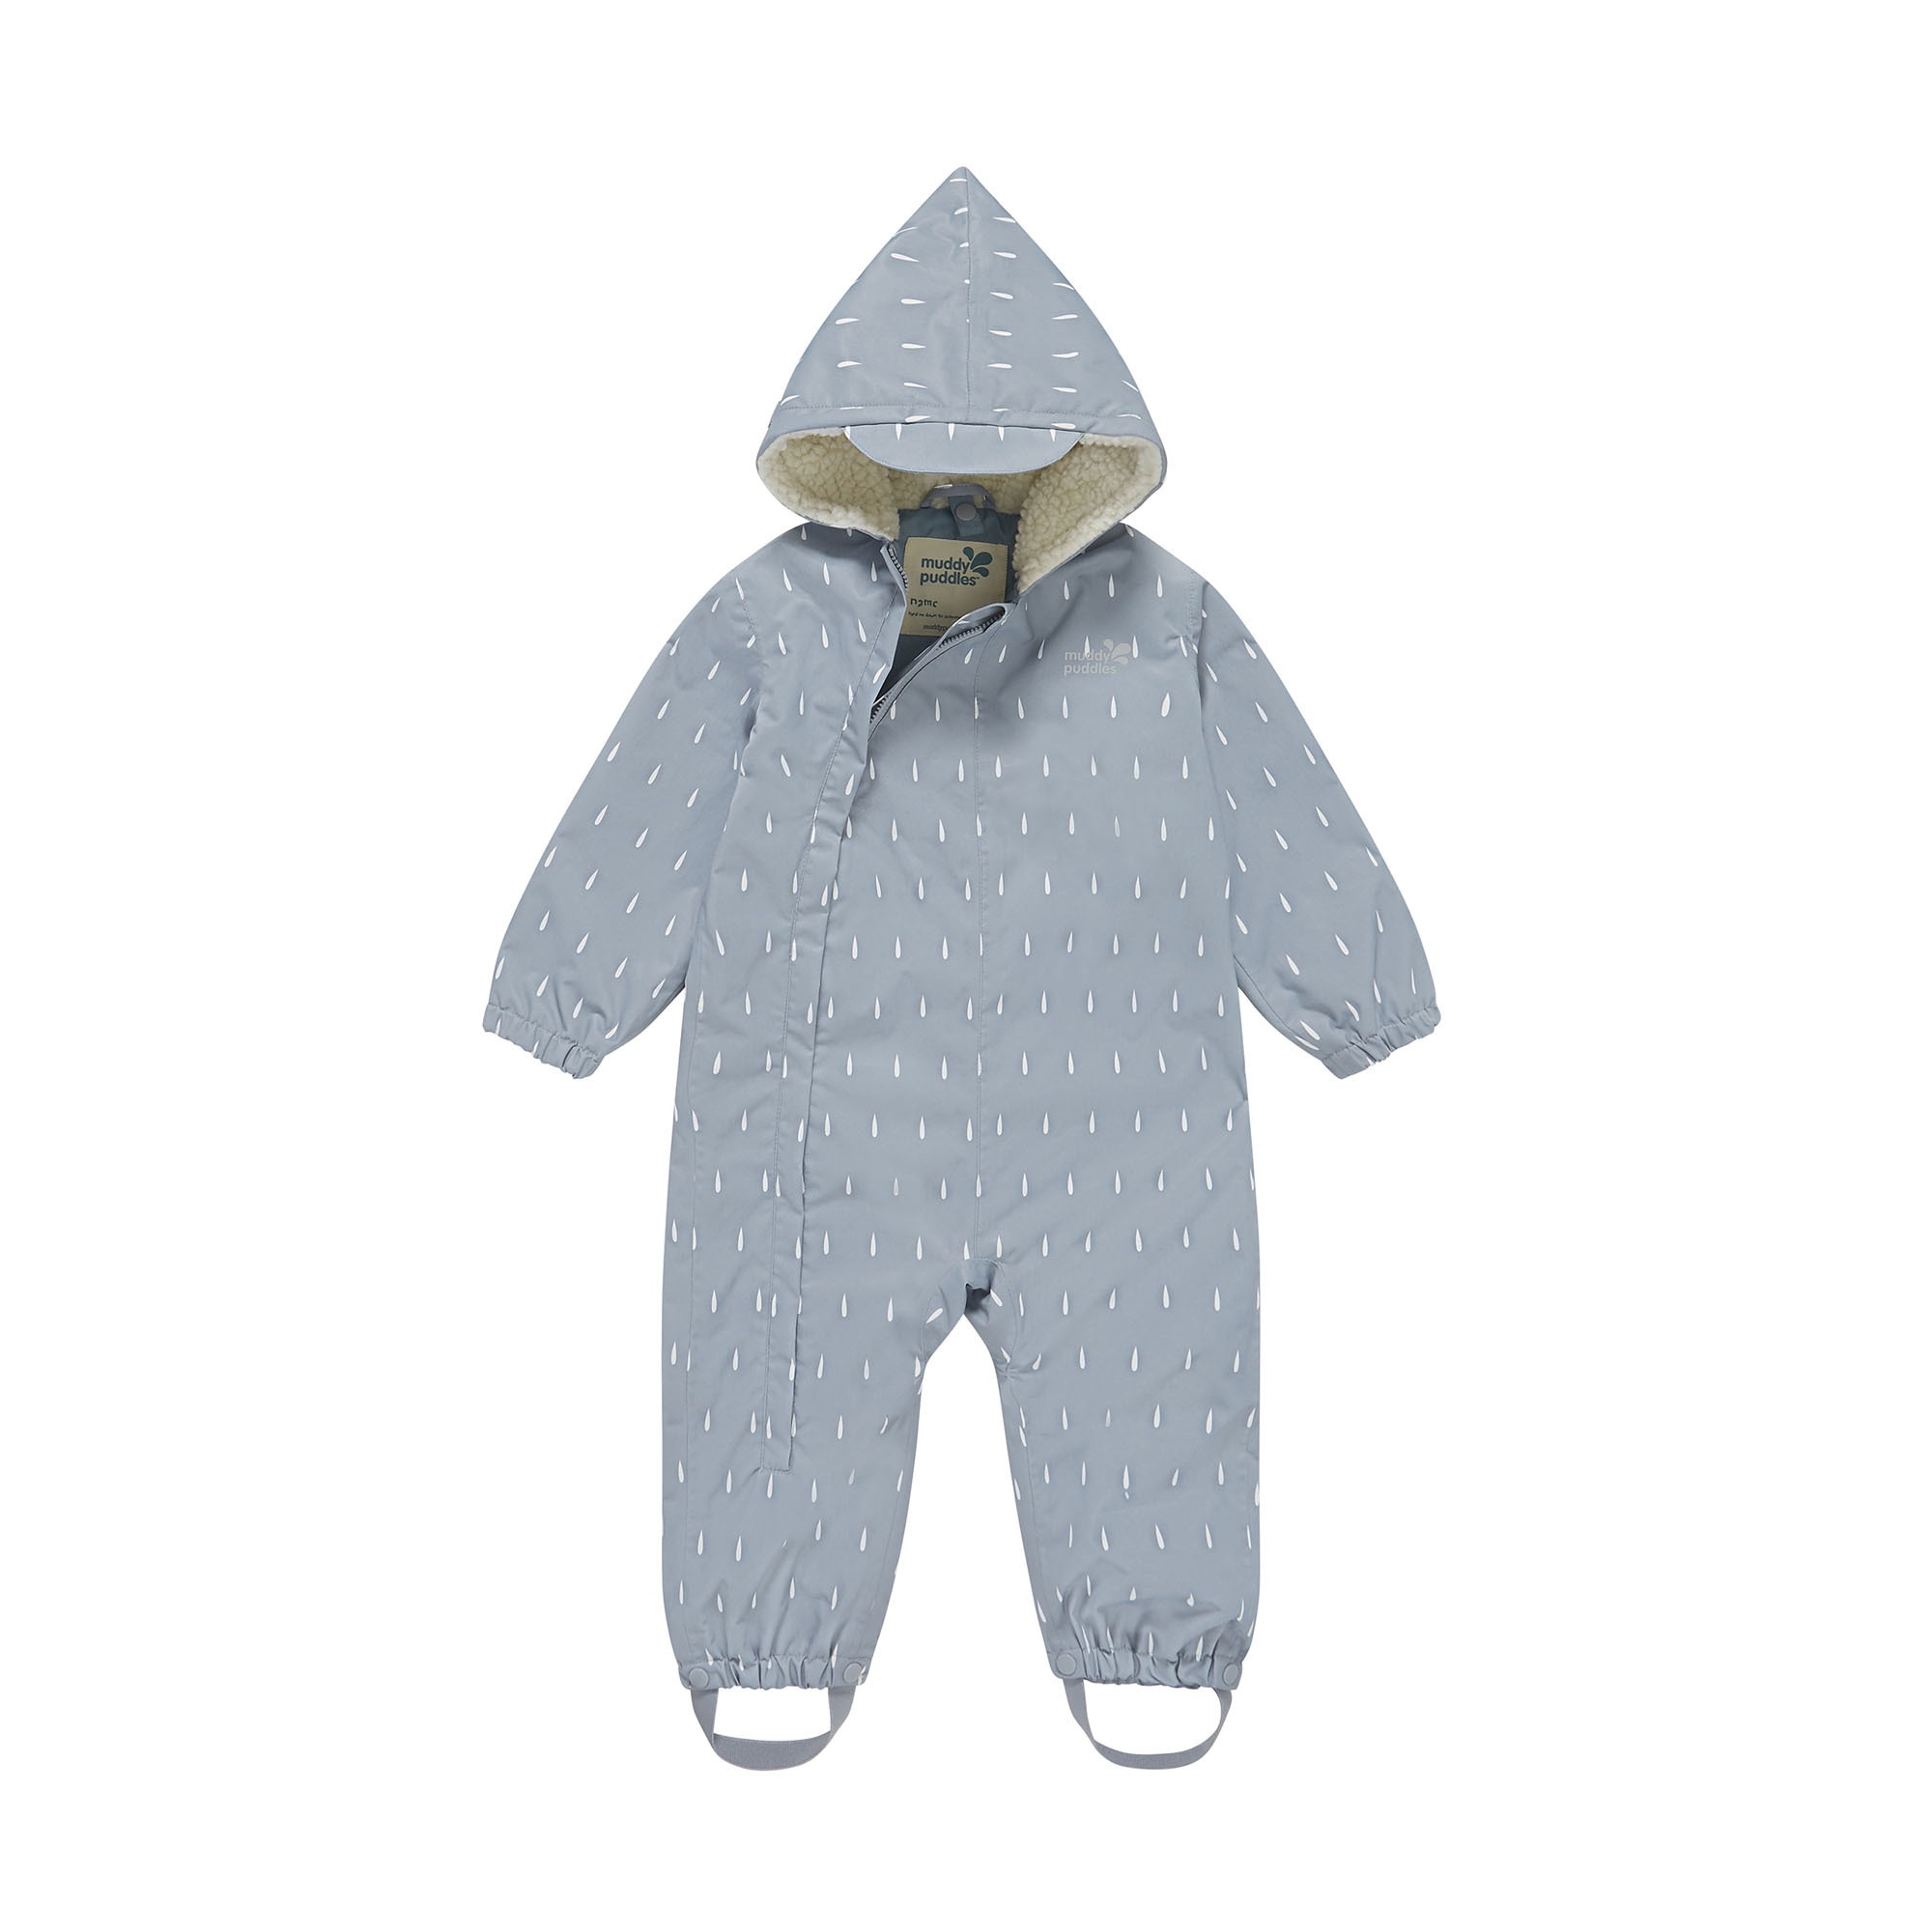 Muddy Puddles Scamp Suit | review